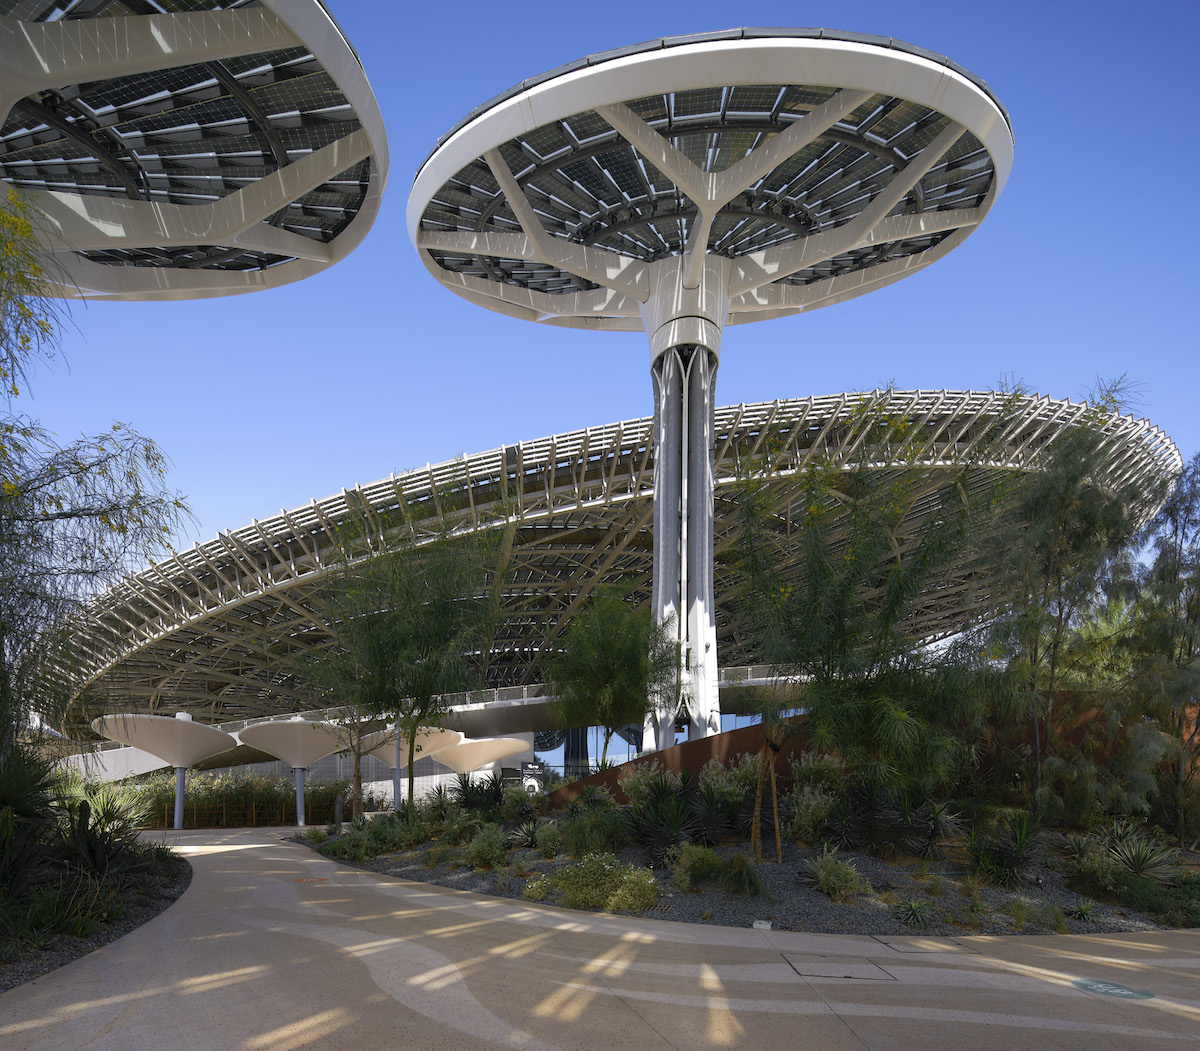 Energy Trees at Terra Sustainability Pavilion by Grimshaw at Dubai Expo 2020